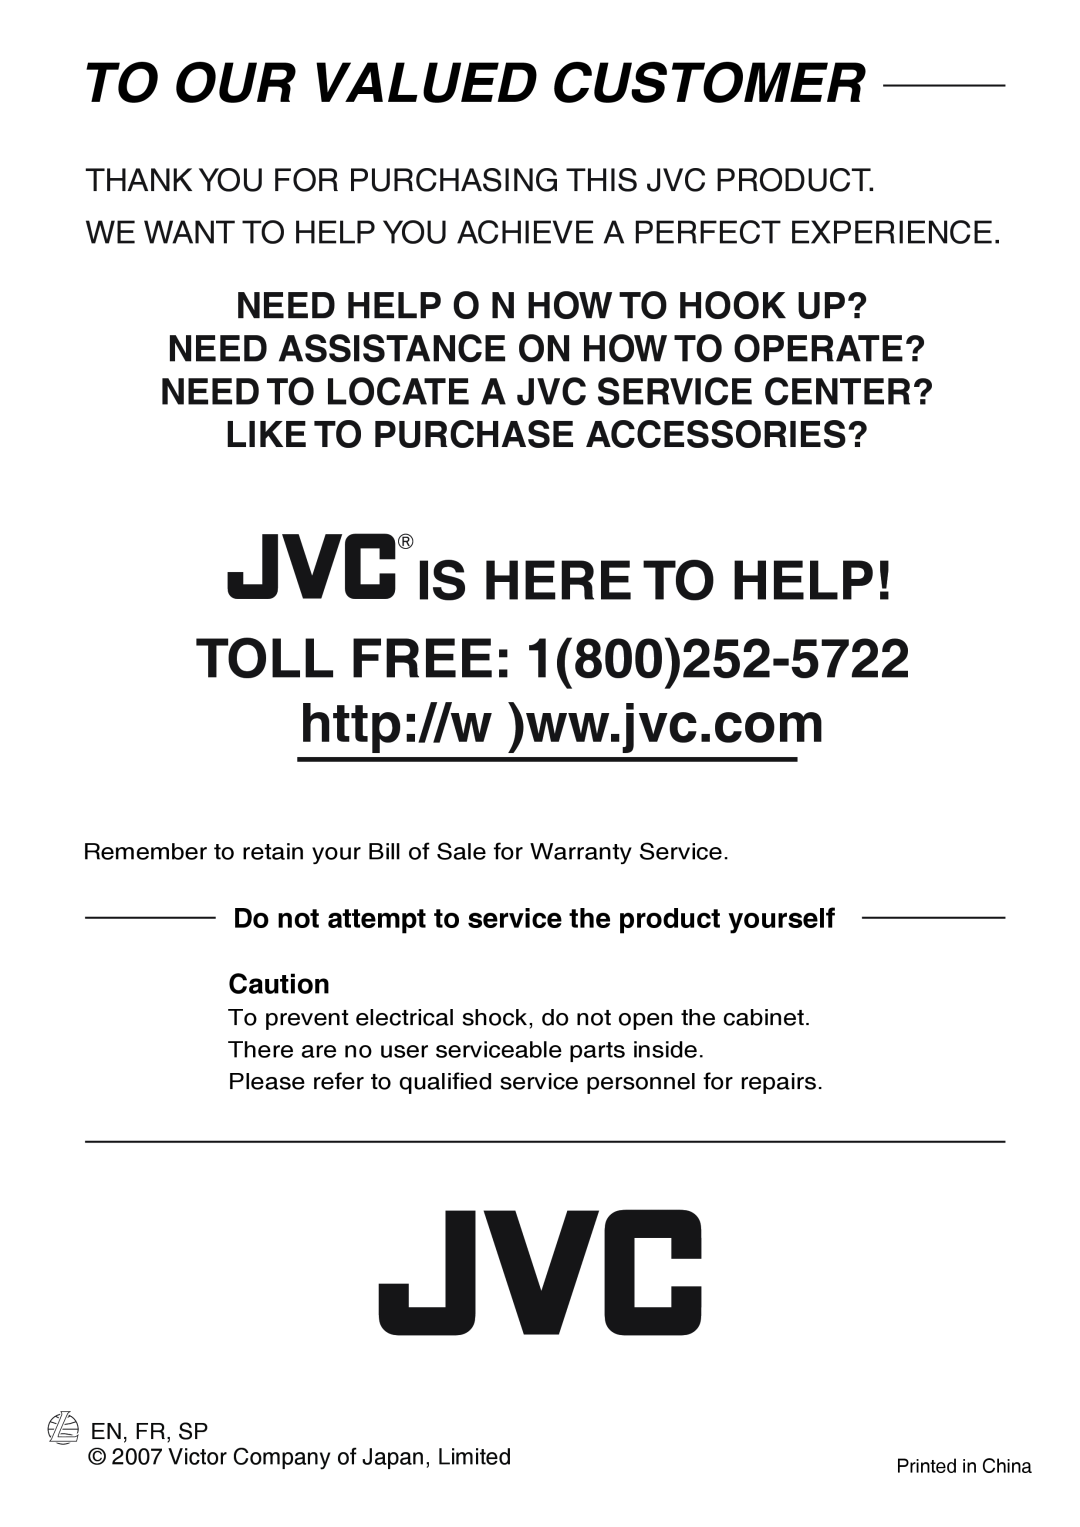 JVC CS-AW8540, CS-AW8520 To Our Valued Customer, Is Here To Help, Thank You For Purchasing This Jvc Product 